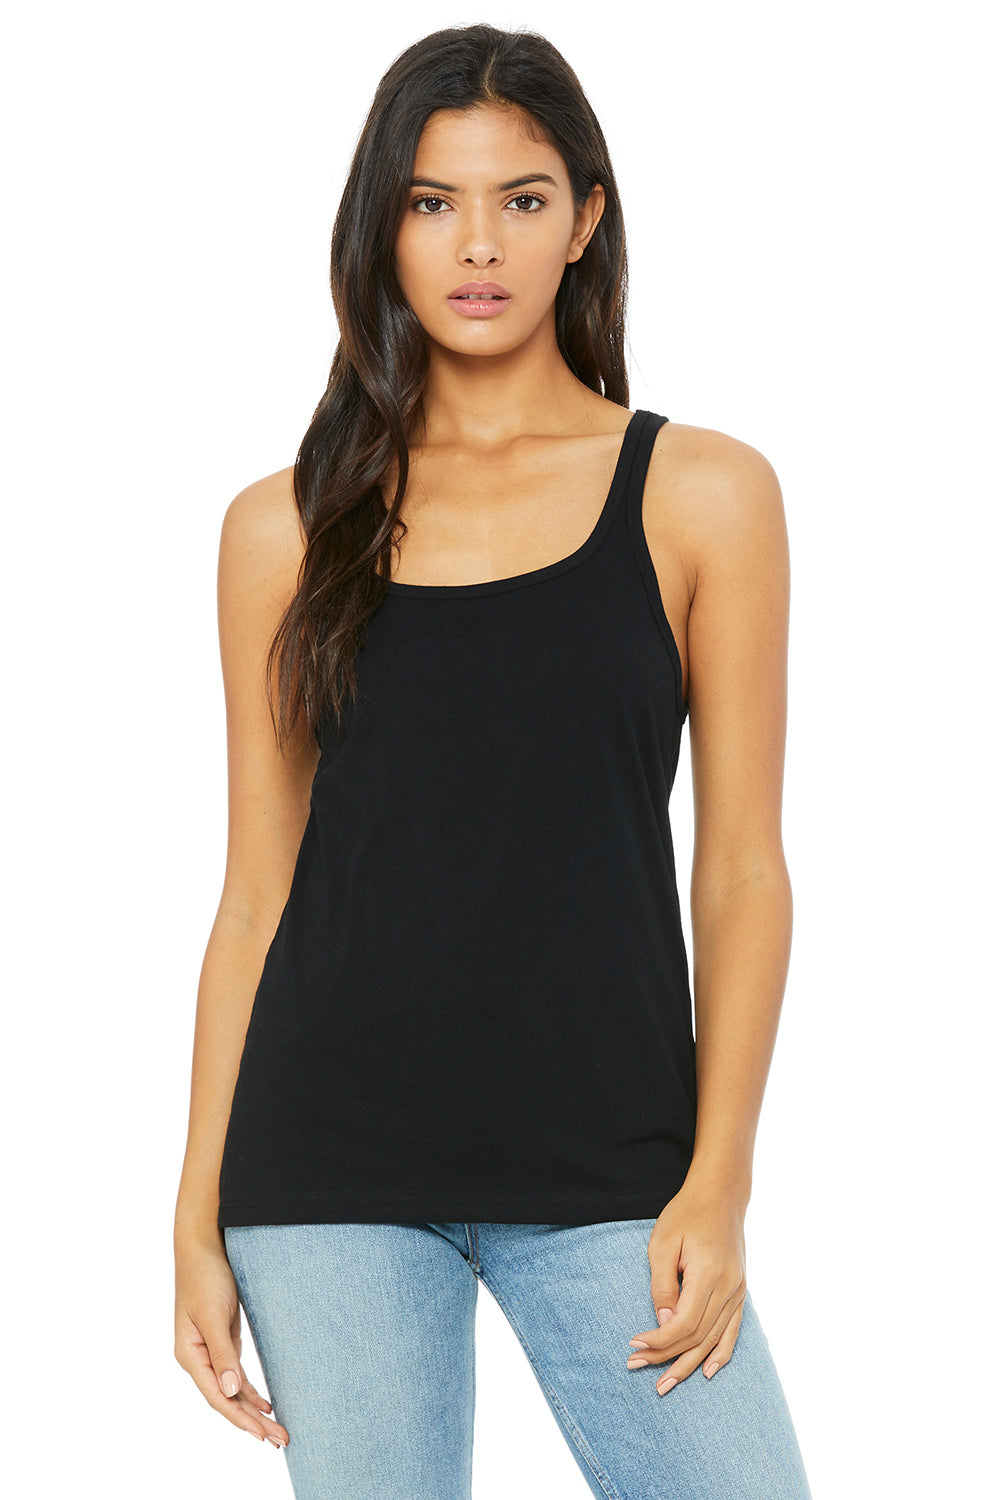 Bella + Canvas 6488 Womens Relaxed Jersey Tank Top Black Front